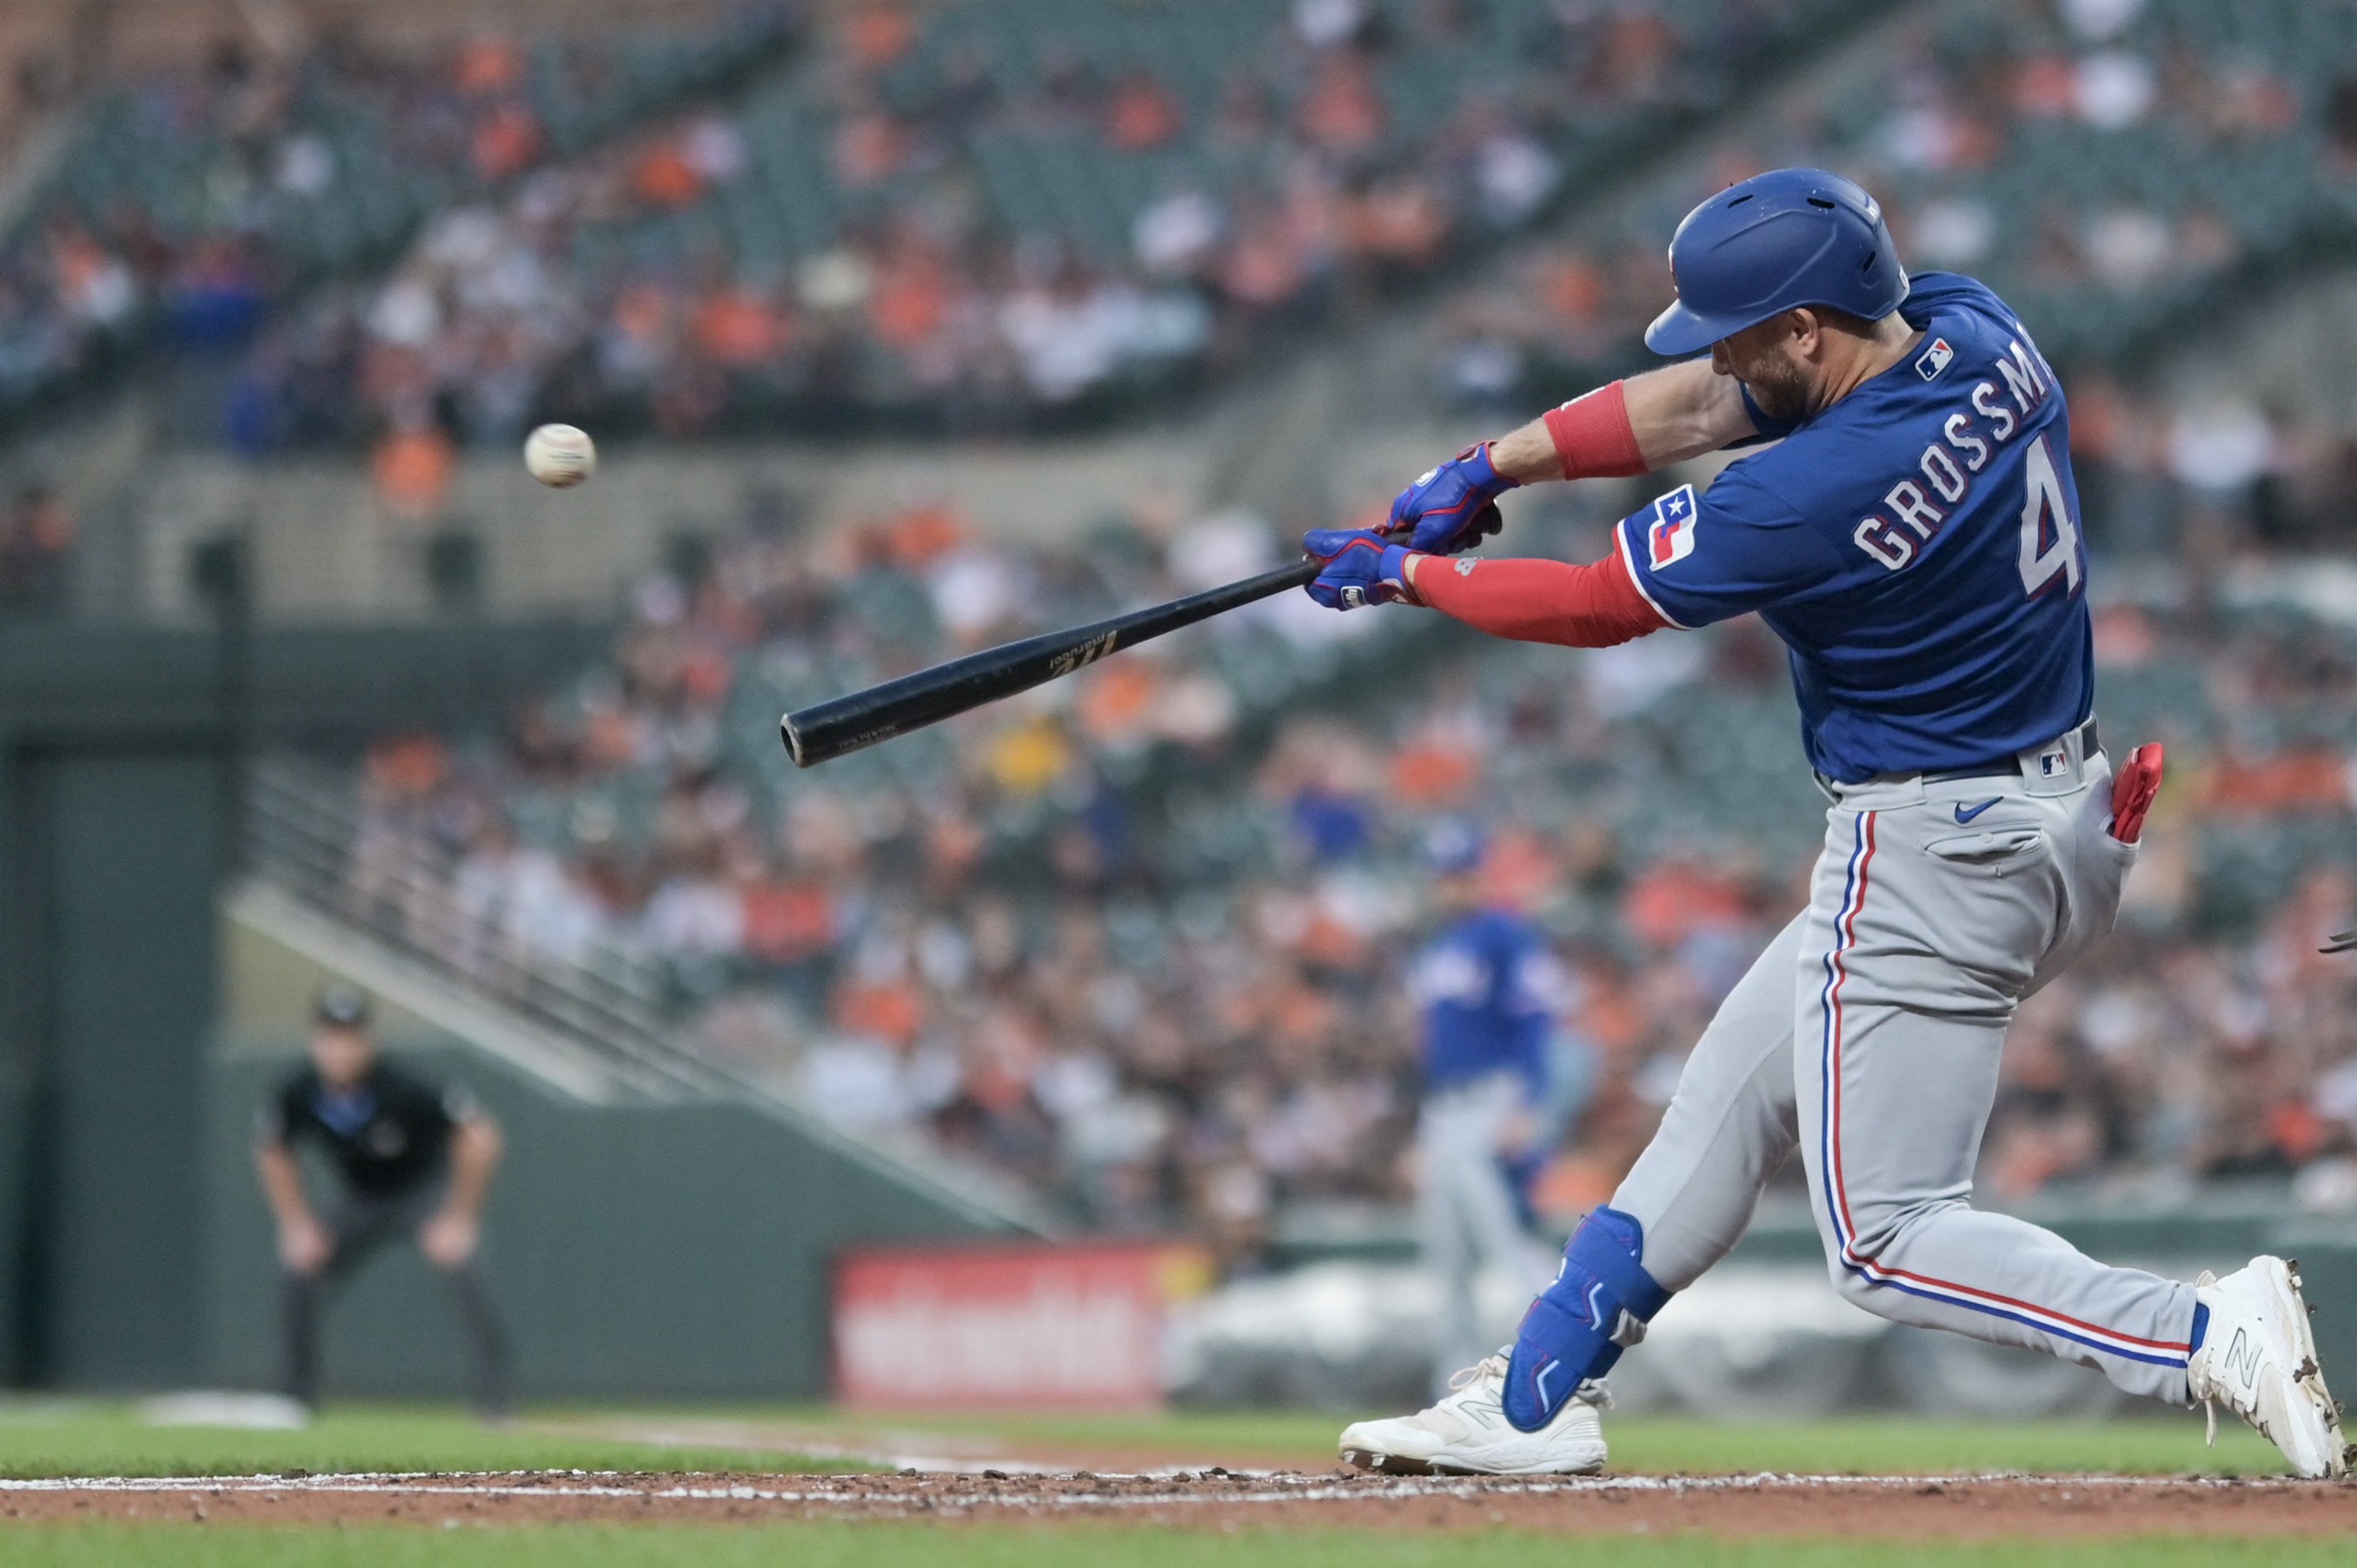 Corey Seager's slam powers Rangers' 8-run inning in win over O's